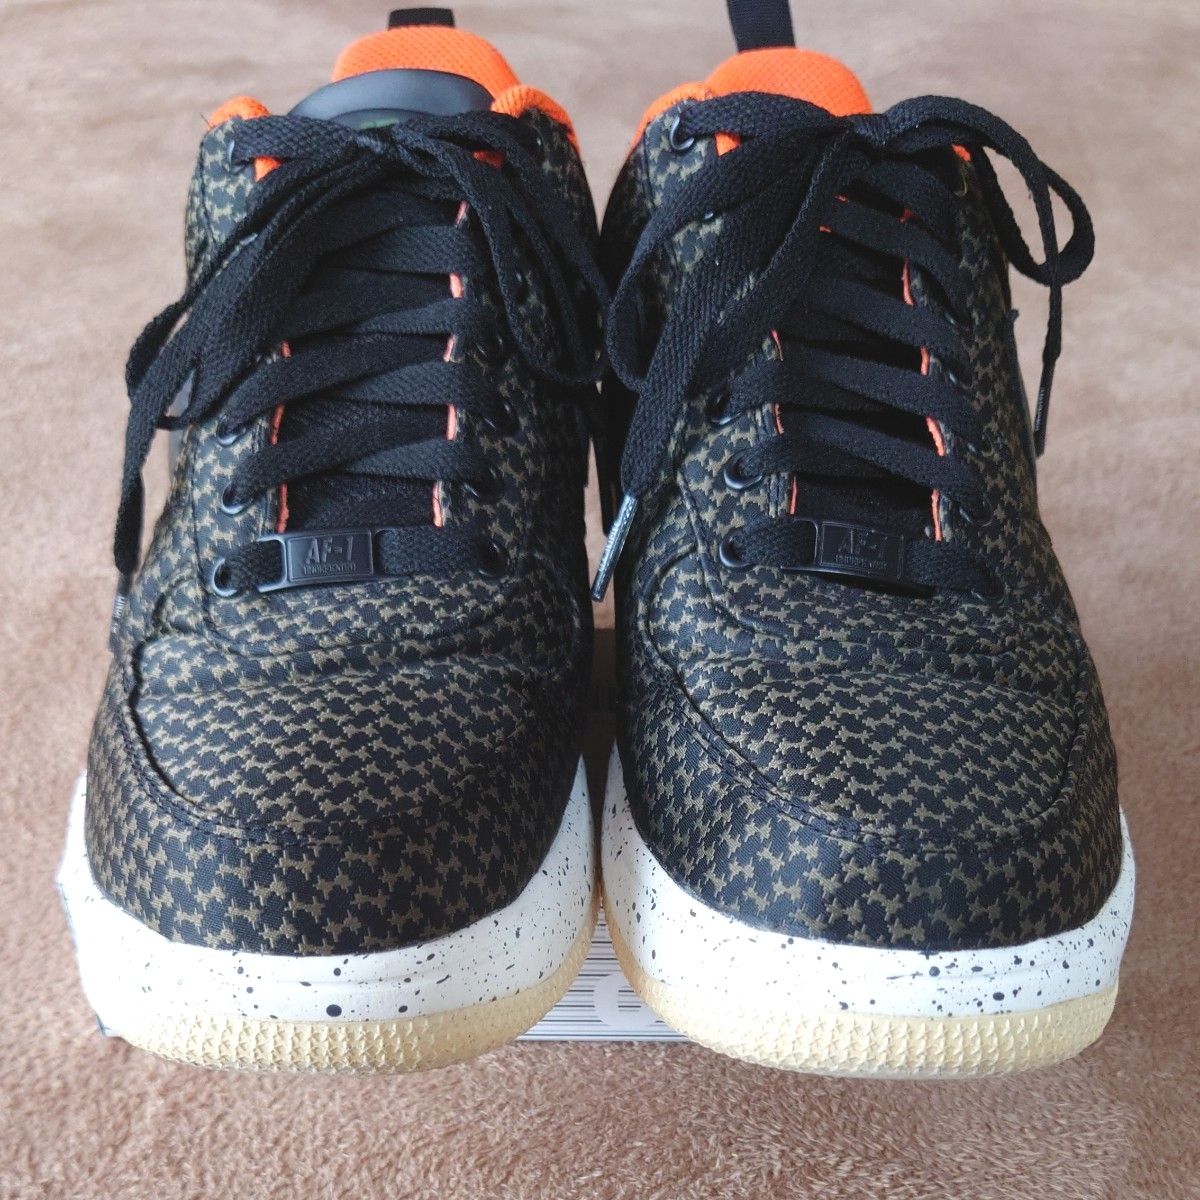 NIKE LUNAR FORCE 1 LOW UNDEFEATED ルナフォース1 アンディフィーテッド コラボ 26cm